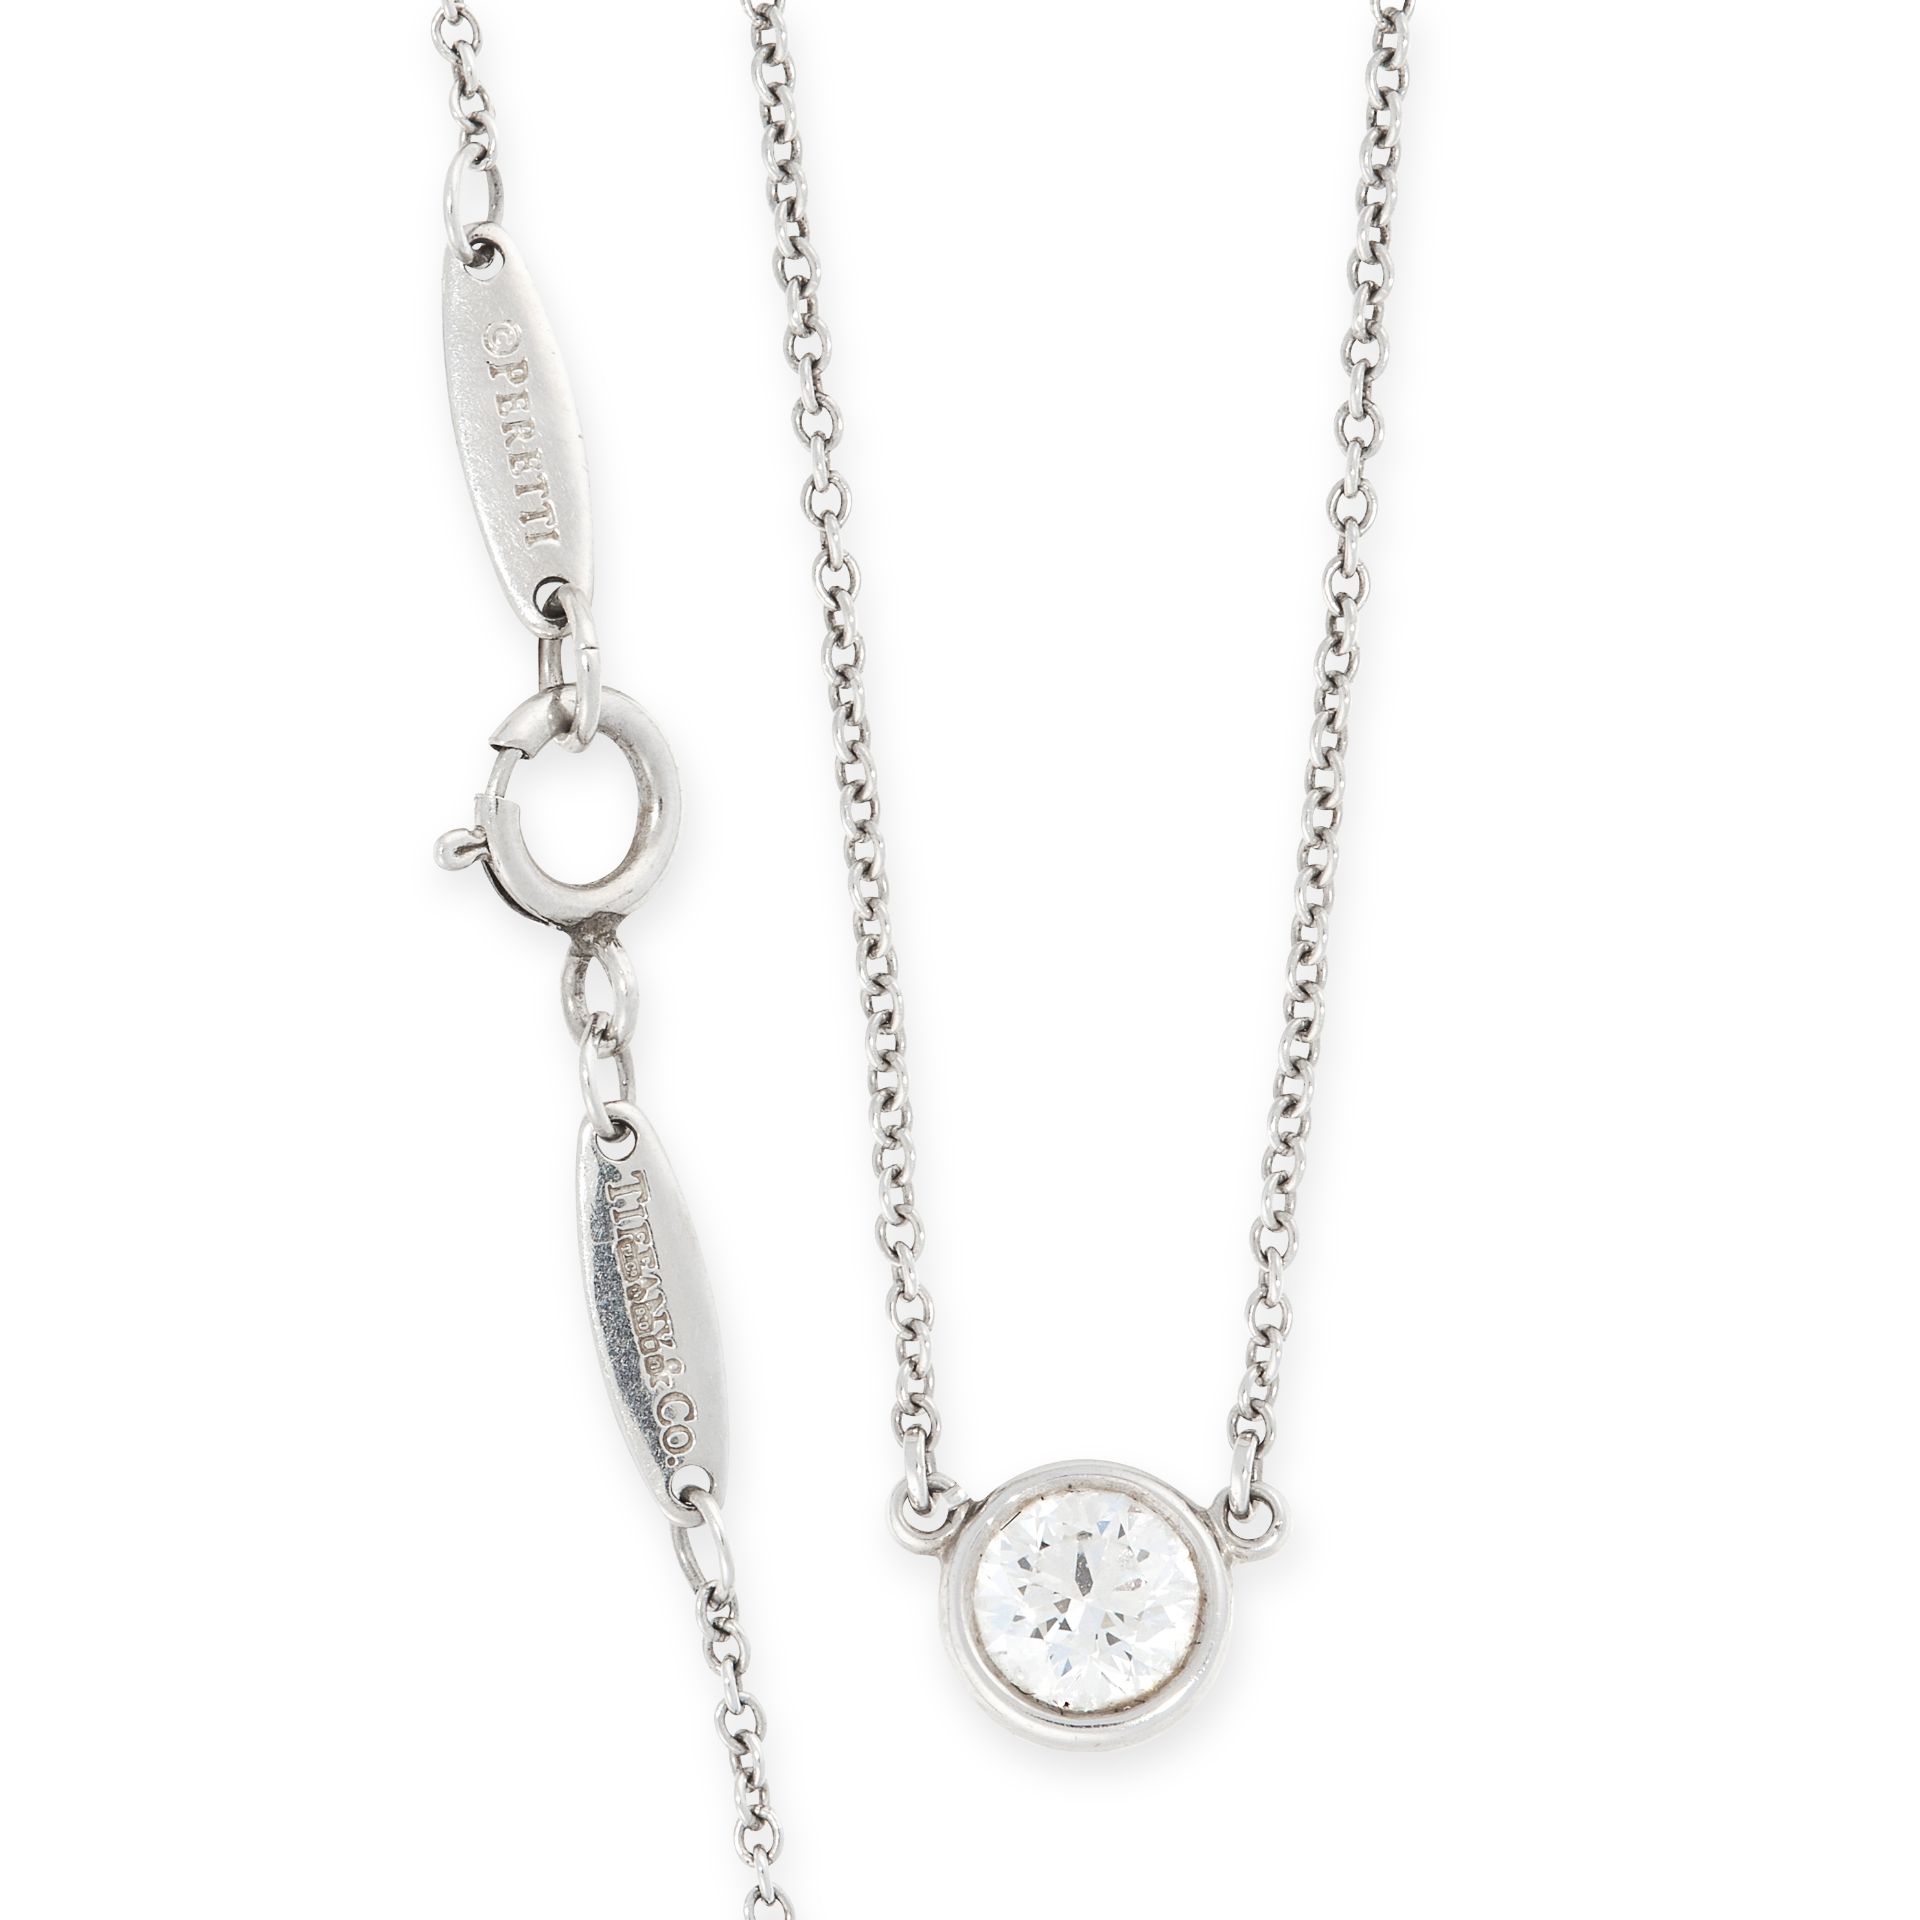 A DIAMONDS BY THE YARD DIAMOND PENDANT NECKLACE, ELSA PERETTI FOR TIFFANY & CO in platinum, set with